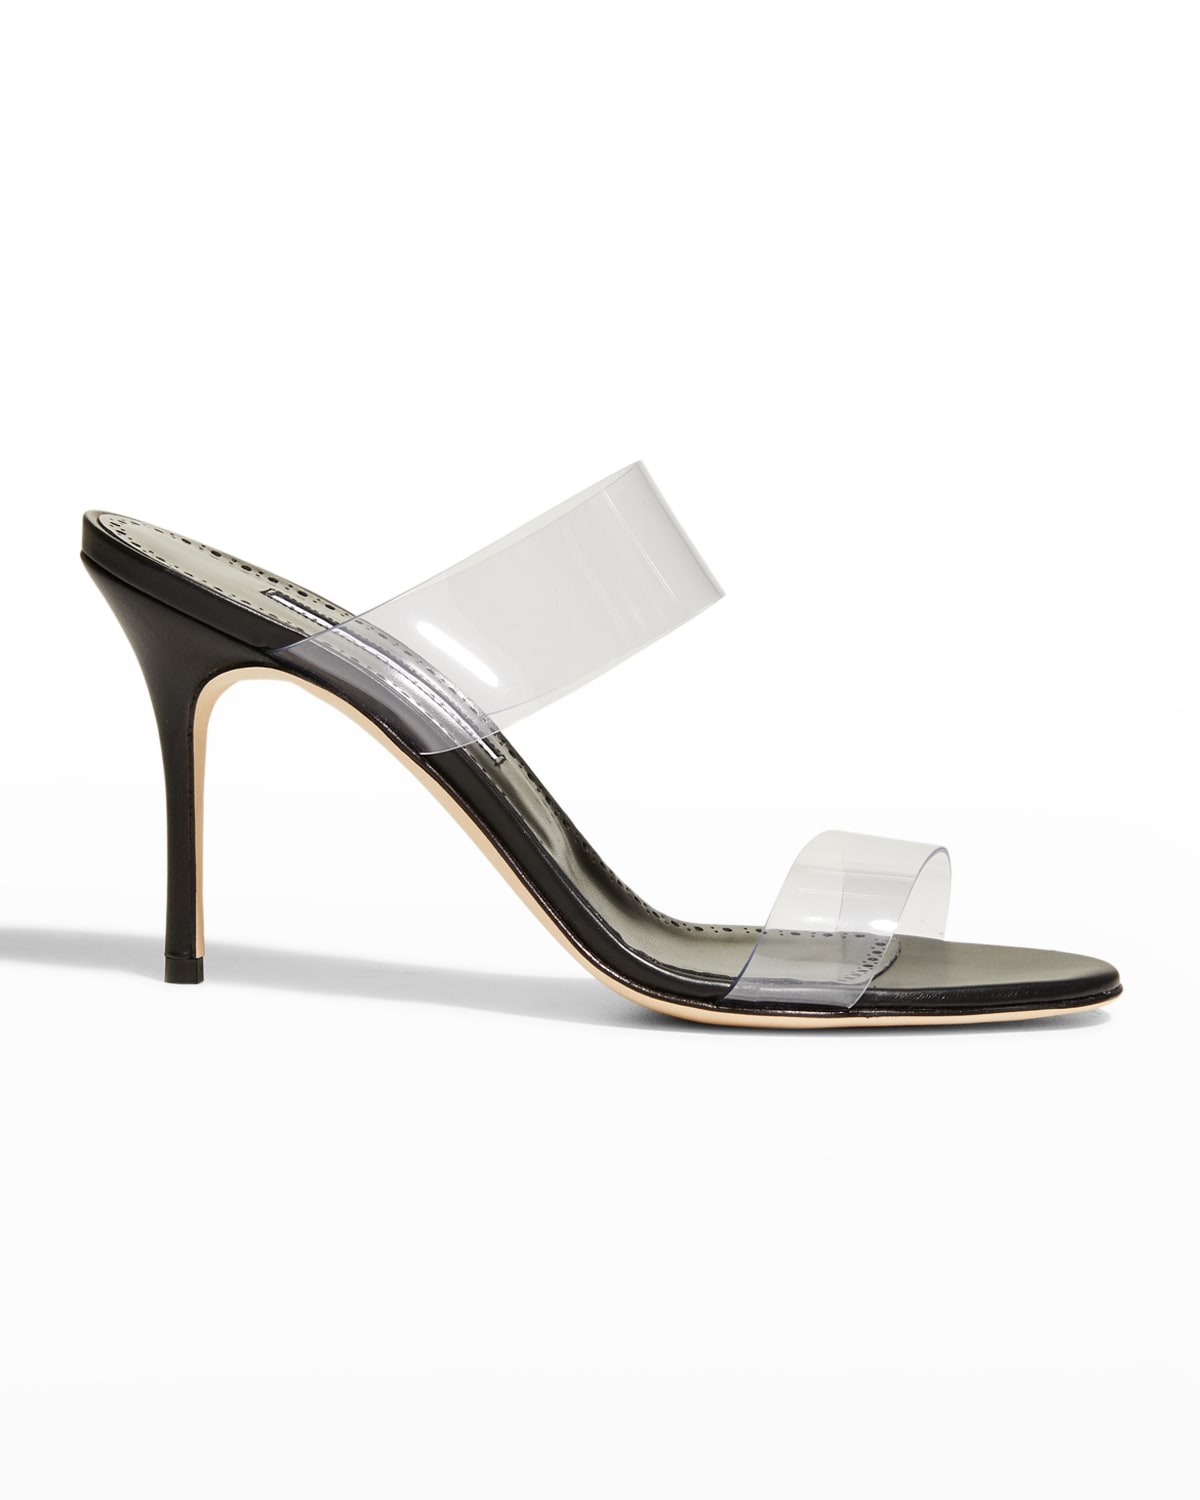 Manolo Blahnik Scolto Clear Two-band Slide Sandals In Blck0015